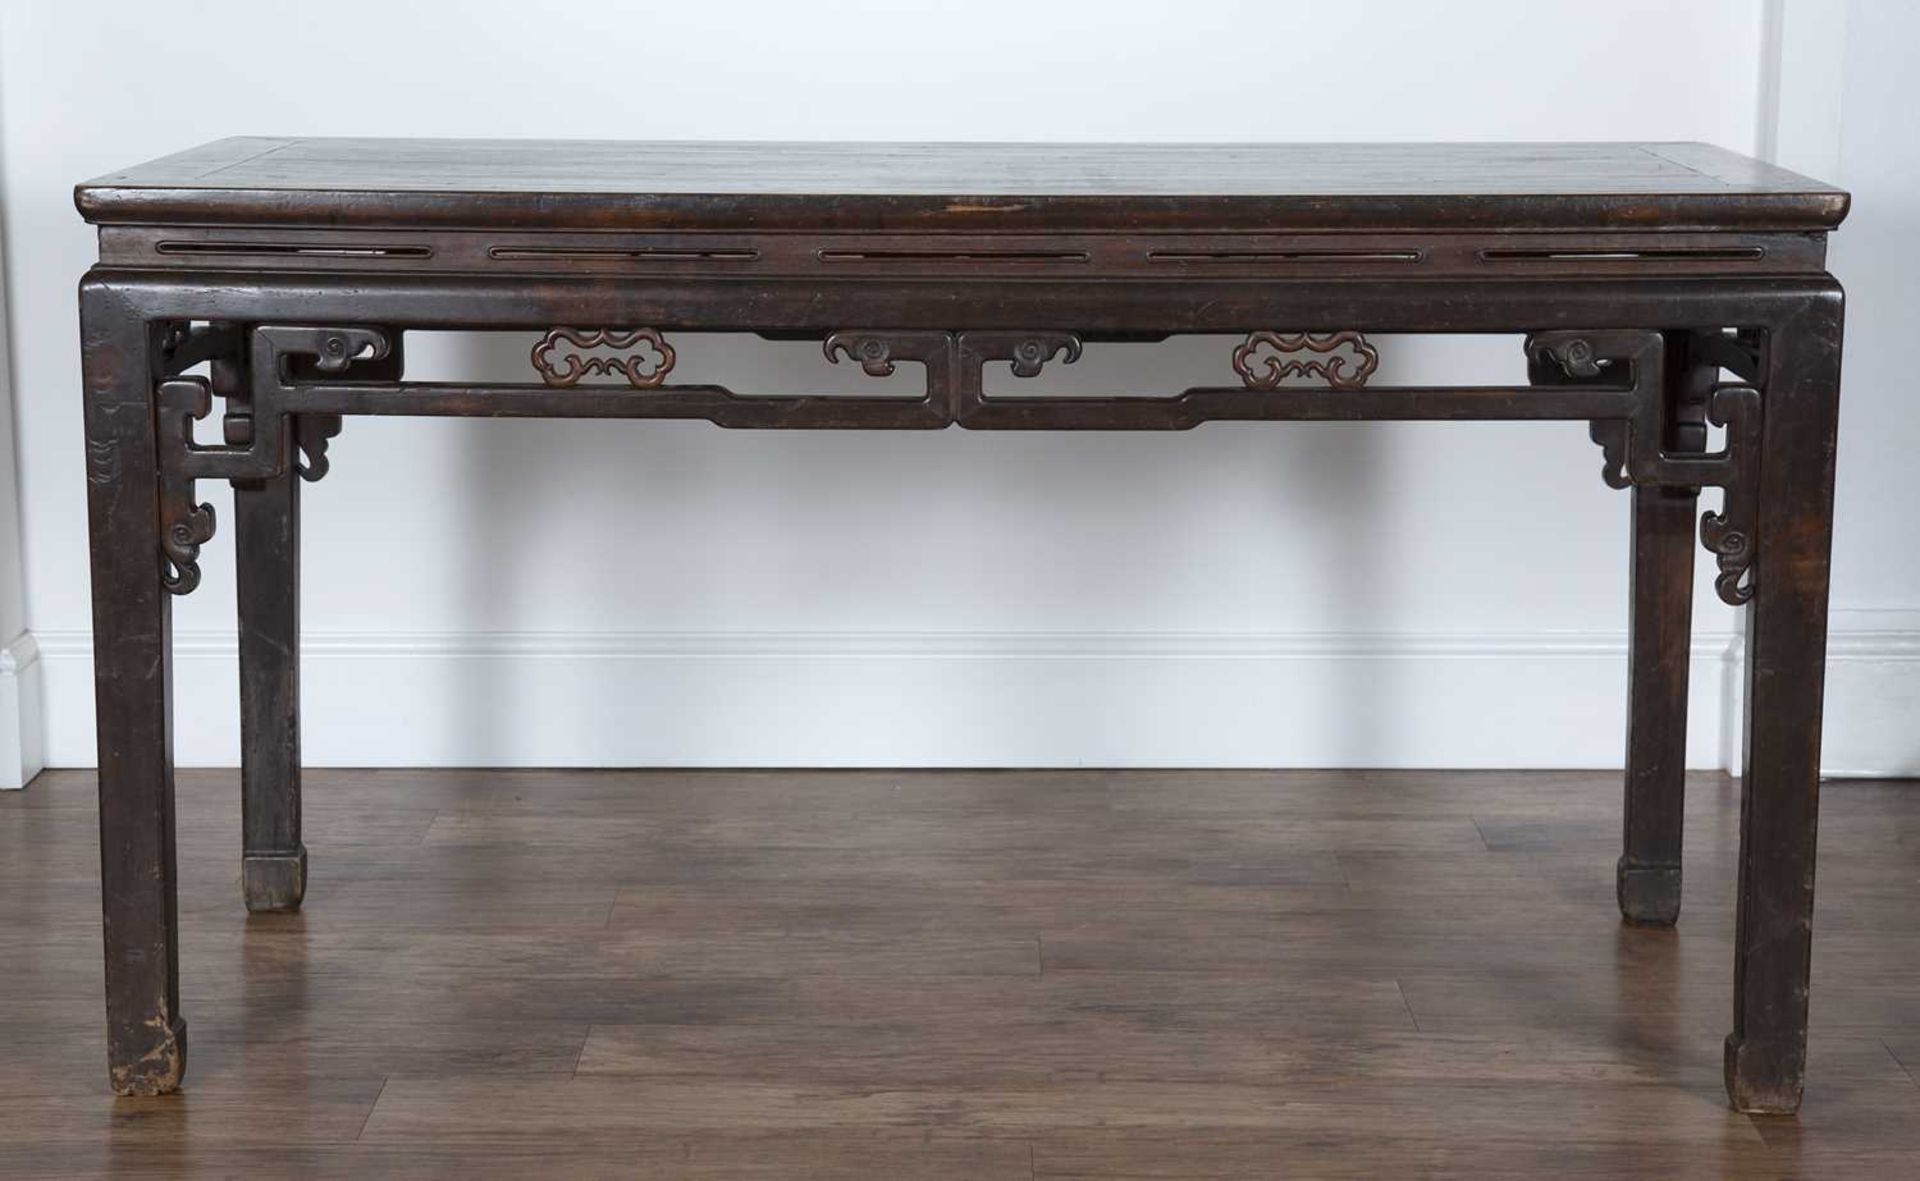 Stained hardwood altar table Chinese, early 20th Century carved in the Ming style with ruyi to the - Image 3 of 4